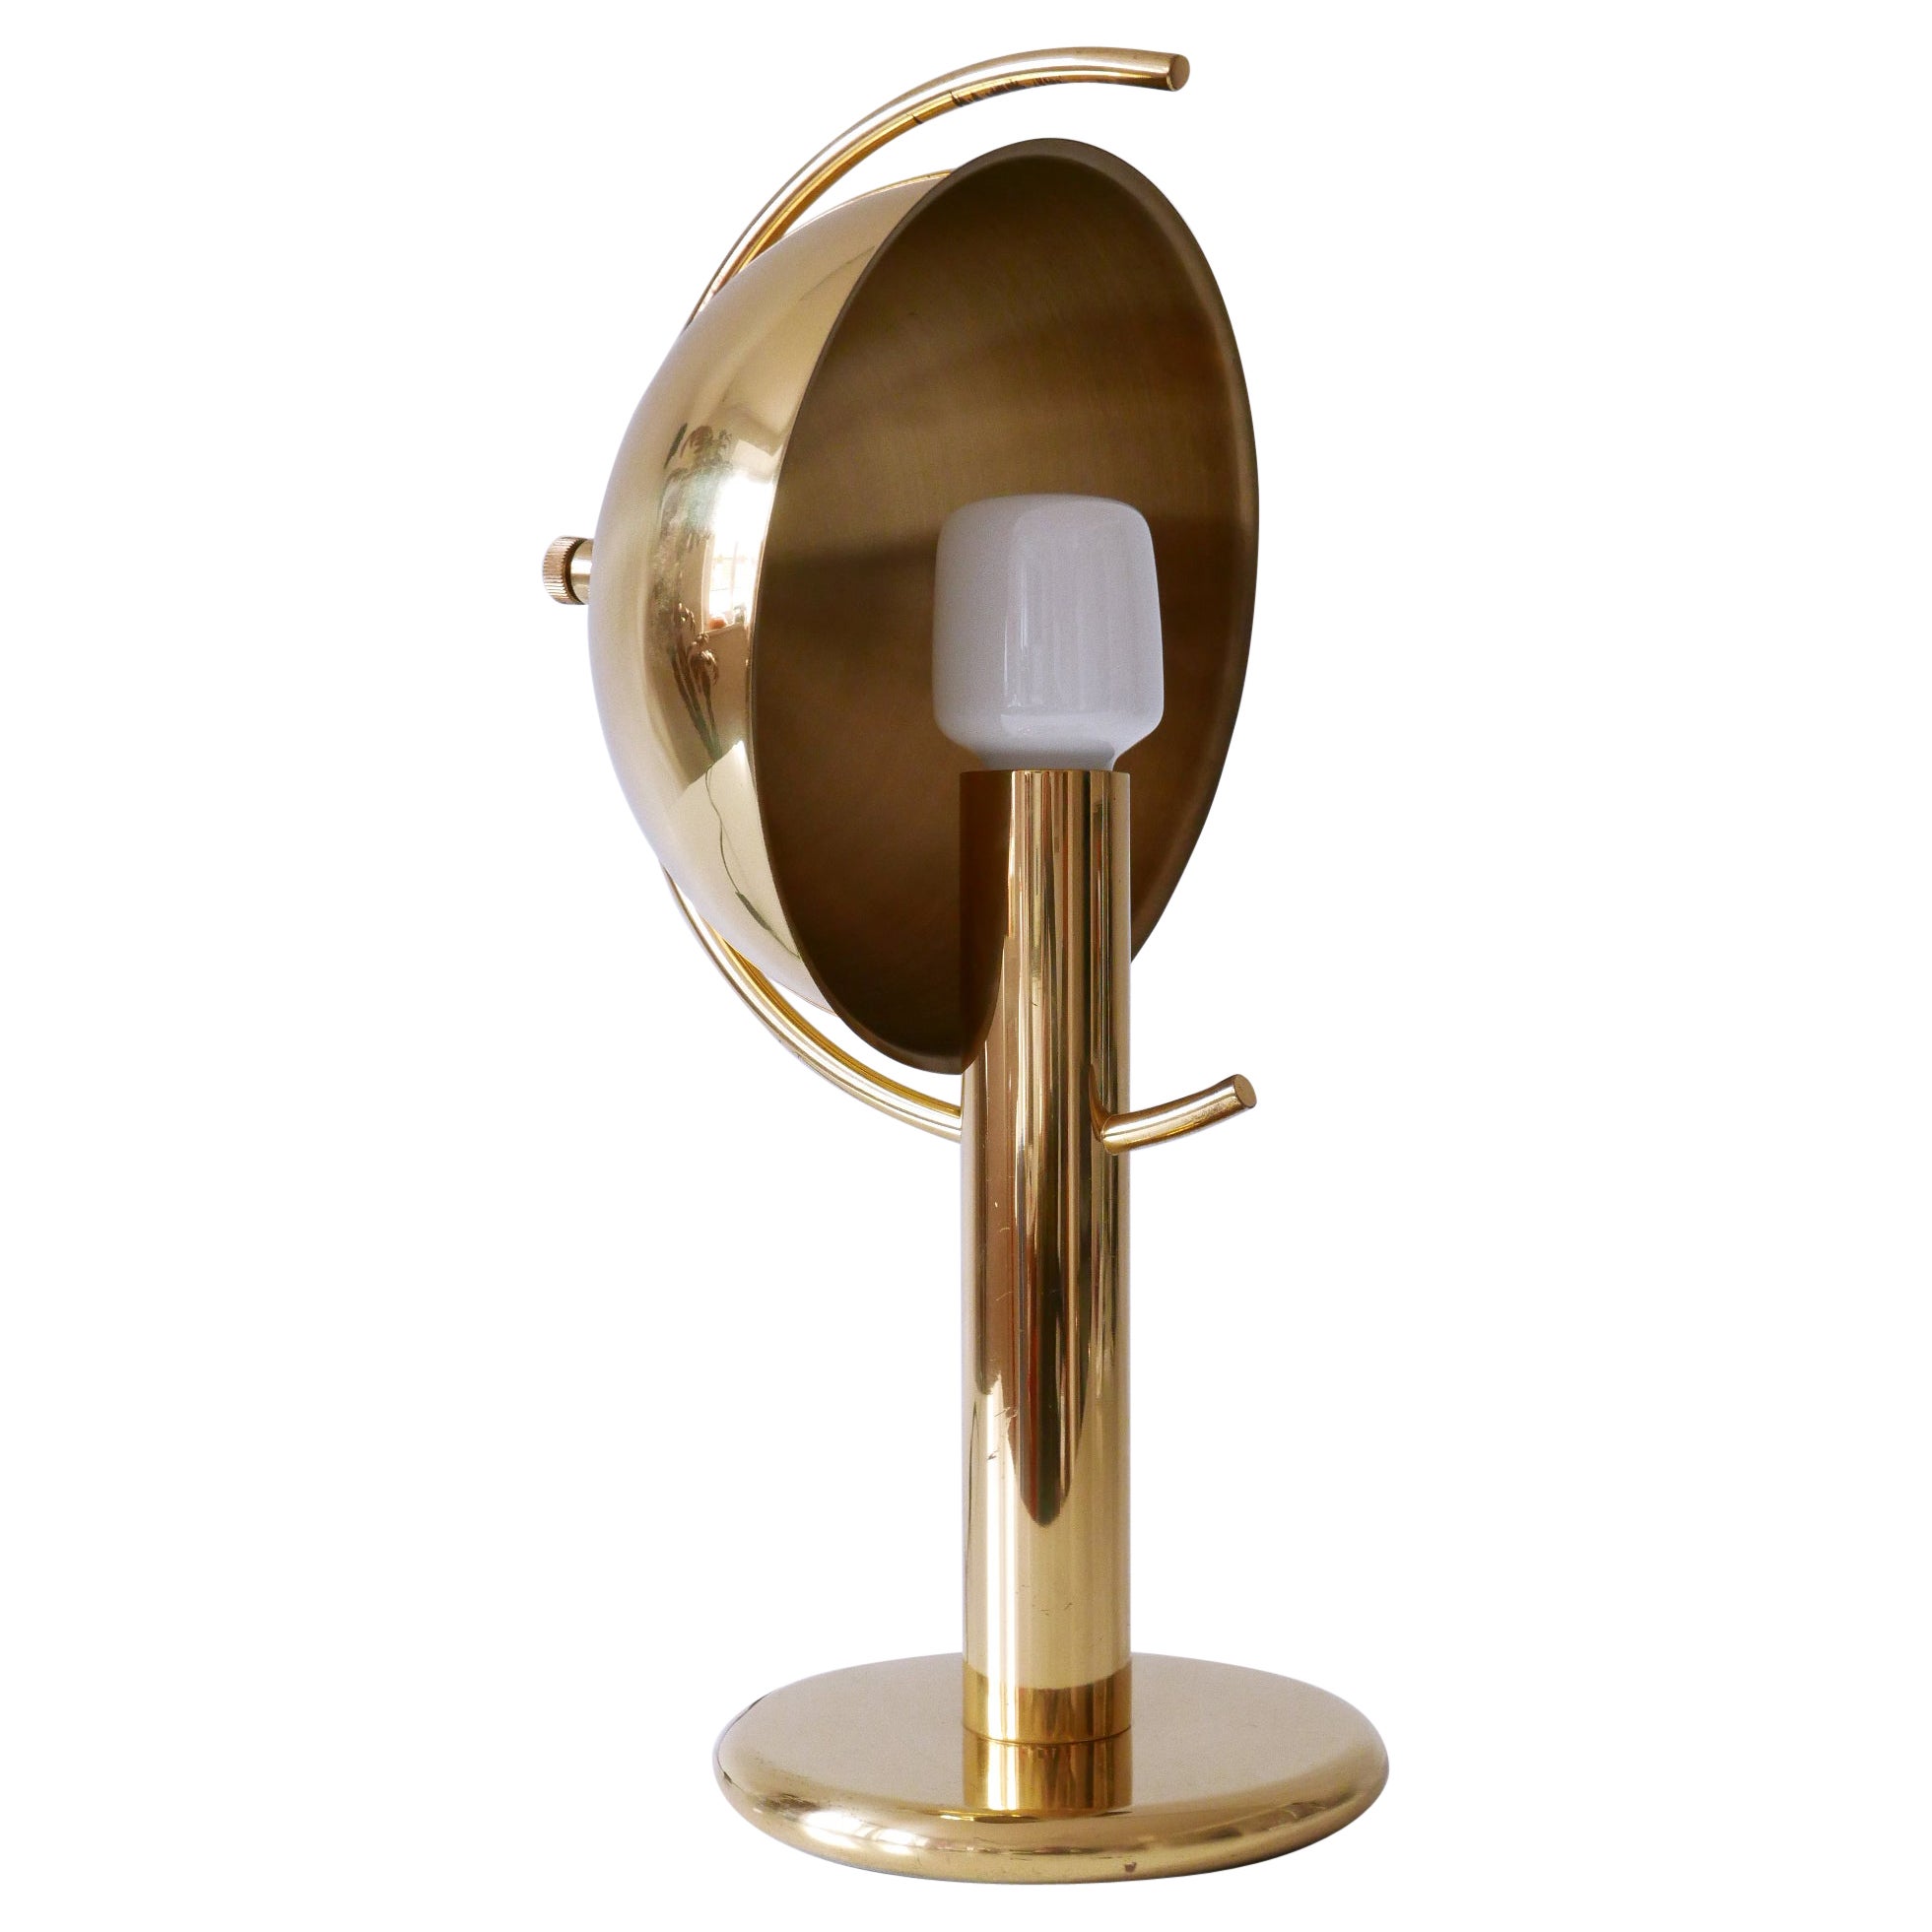 Exceptional Mid-Century Modern Brass Table Lamp by Gebrüder Cosack Germany 1960s